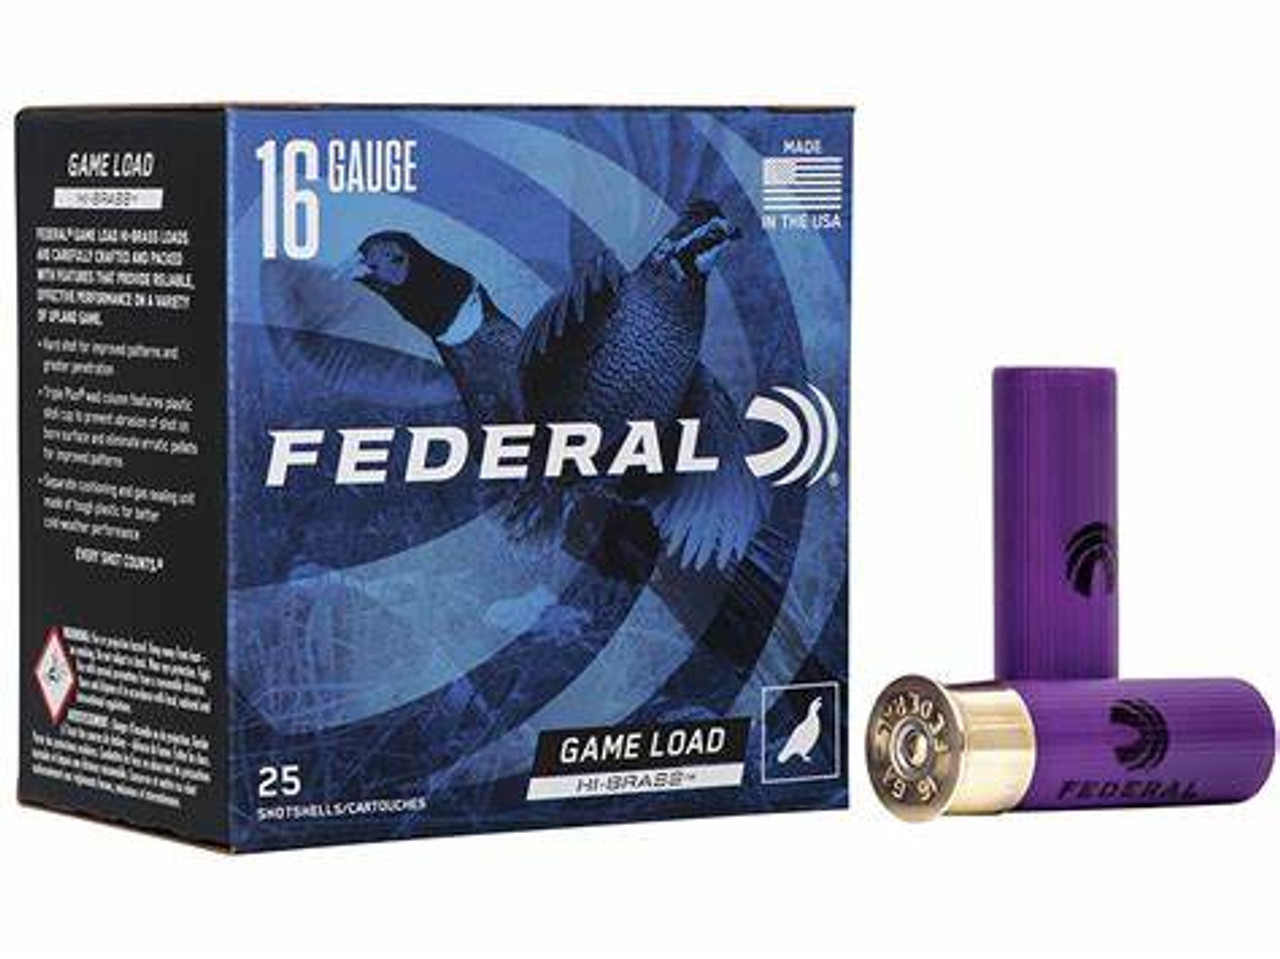 Federal Game Load Upland Hi-Brass Shotgun Ammunition features hard-hitting loads that throw consistent patterns for the best possible performance. Woods or fields. Fur or feathers. Federal Game Load Upland Hi-Brass loads have you covered. They are carefully crafted and packed with features that provide reliable, effective performance on a variety of upland game.

 

Features

High-quality round shot is formulated for optimum hardness, improving pattern efficiency
High brass-plated steel head and one-piece wad maximize payloads
Select, high-quality propellant and non-corrosive primer deliver efficient, reliable ignition